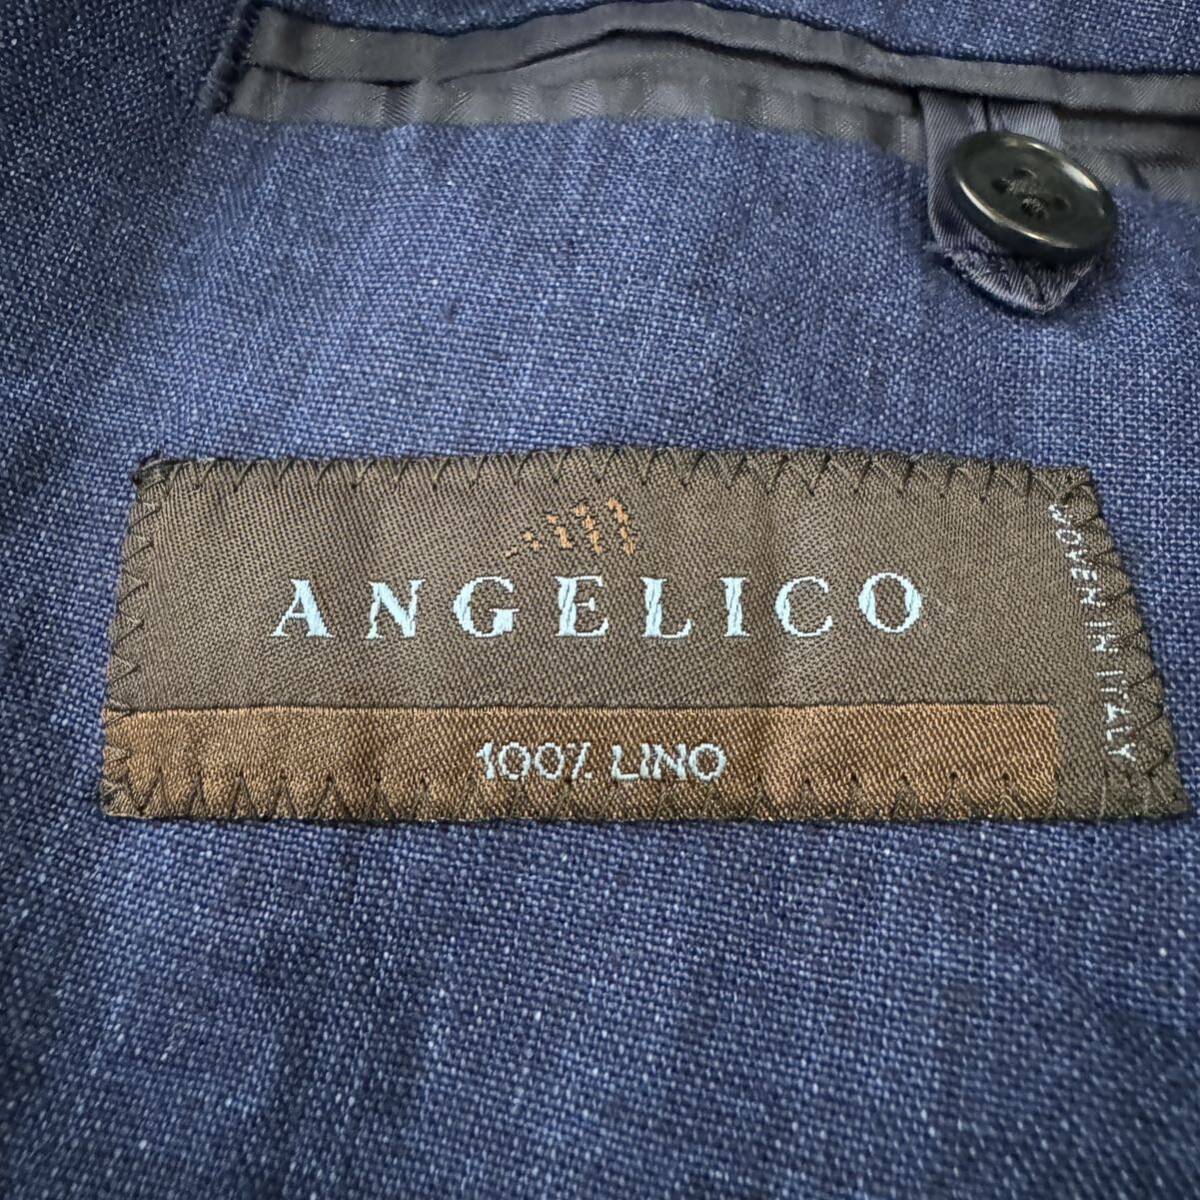  beautiful goods [. ultimate. linen100%] Italy ANGELICO company cloth UNIVERSAL LANGUAGE tailored jacket spring summer S size corresponding universal Language flax 